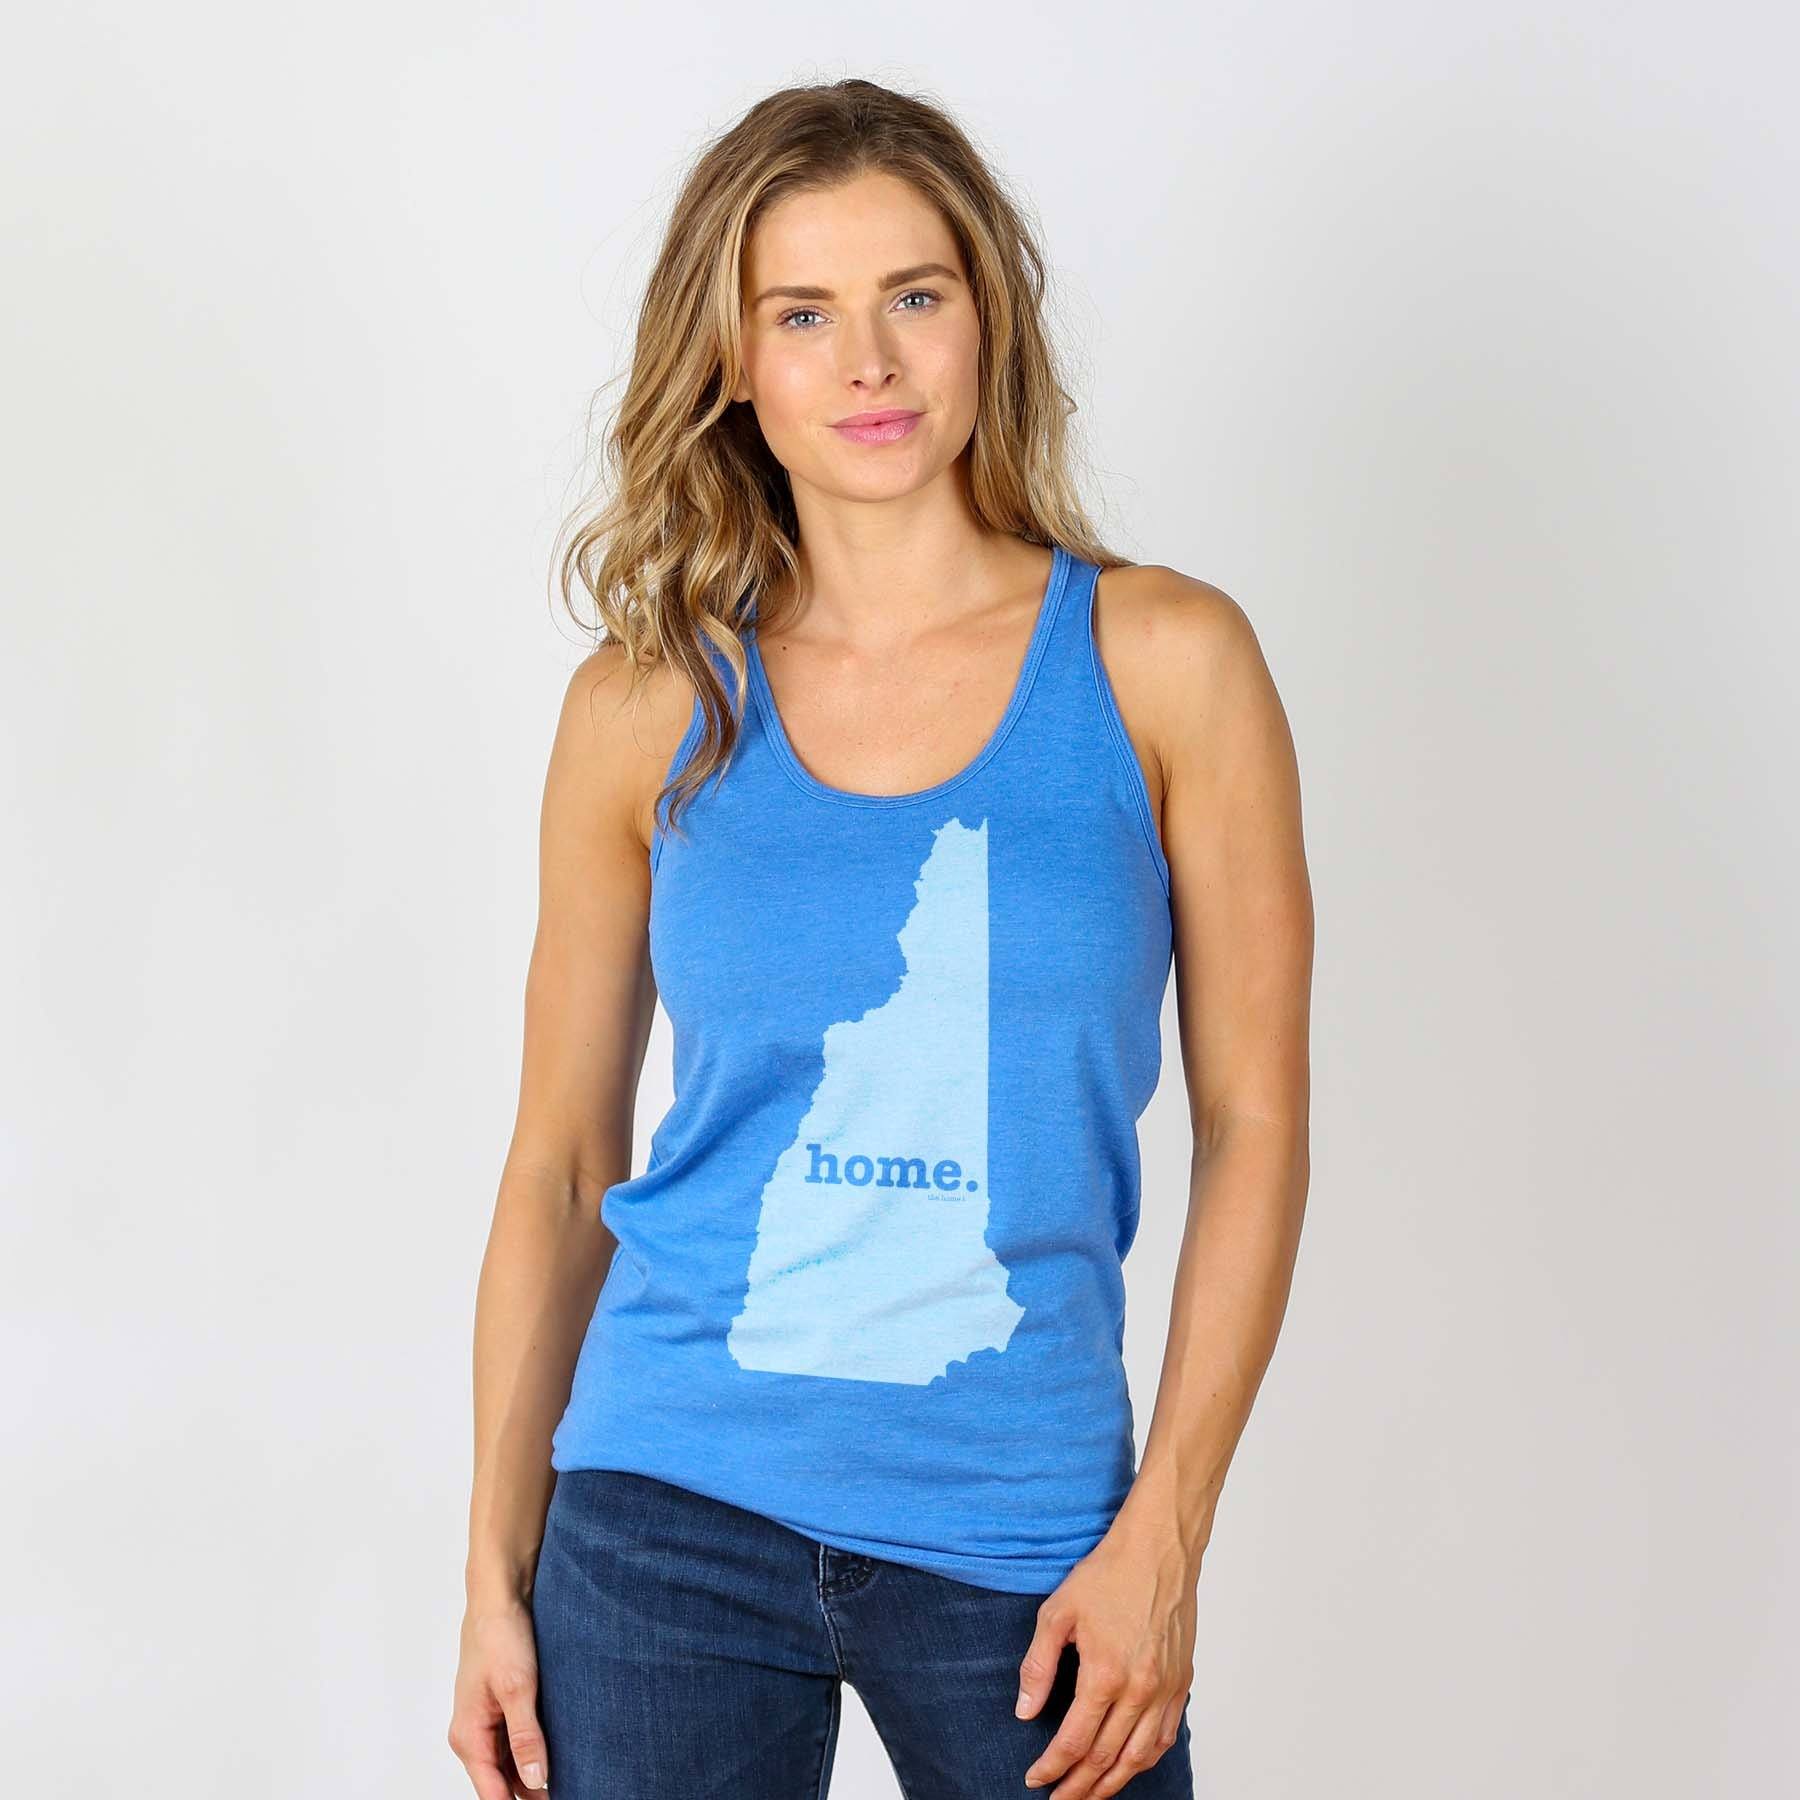 New Hampshire Home Tank Top Tank Top The Home T